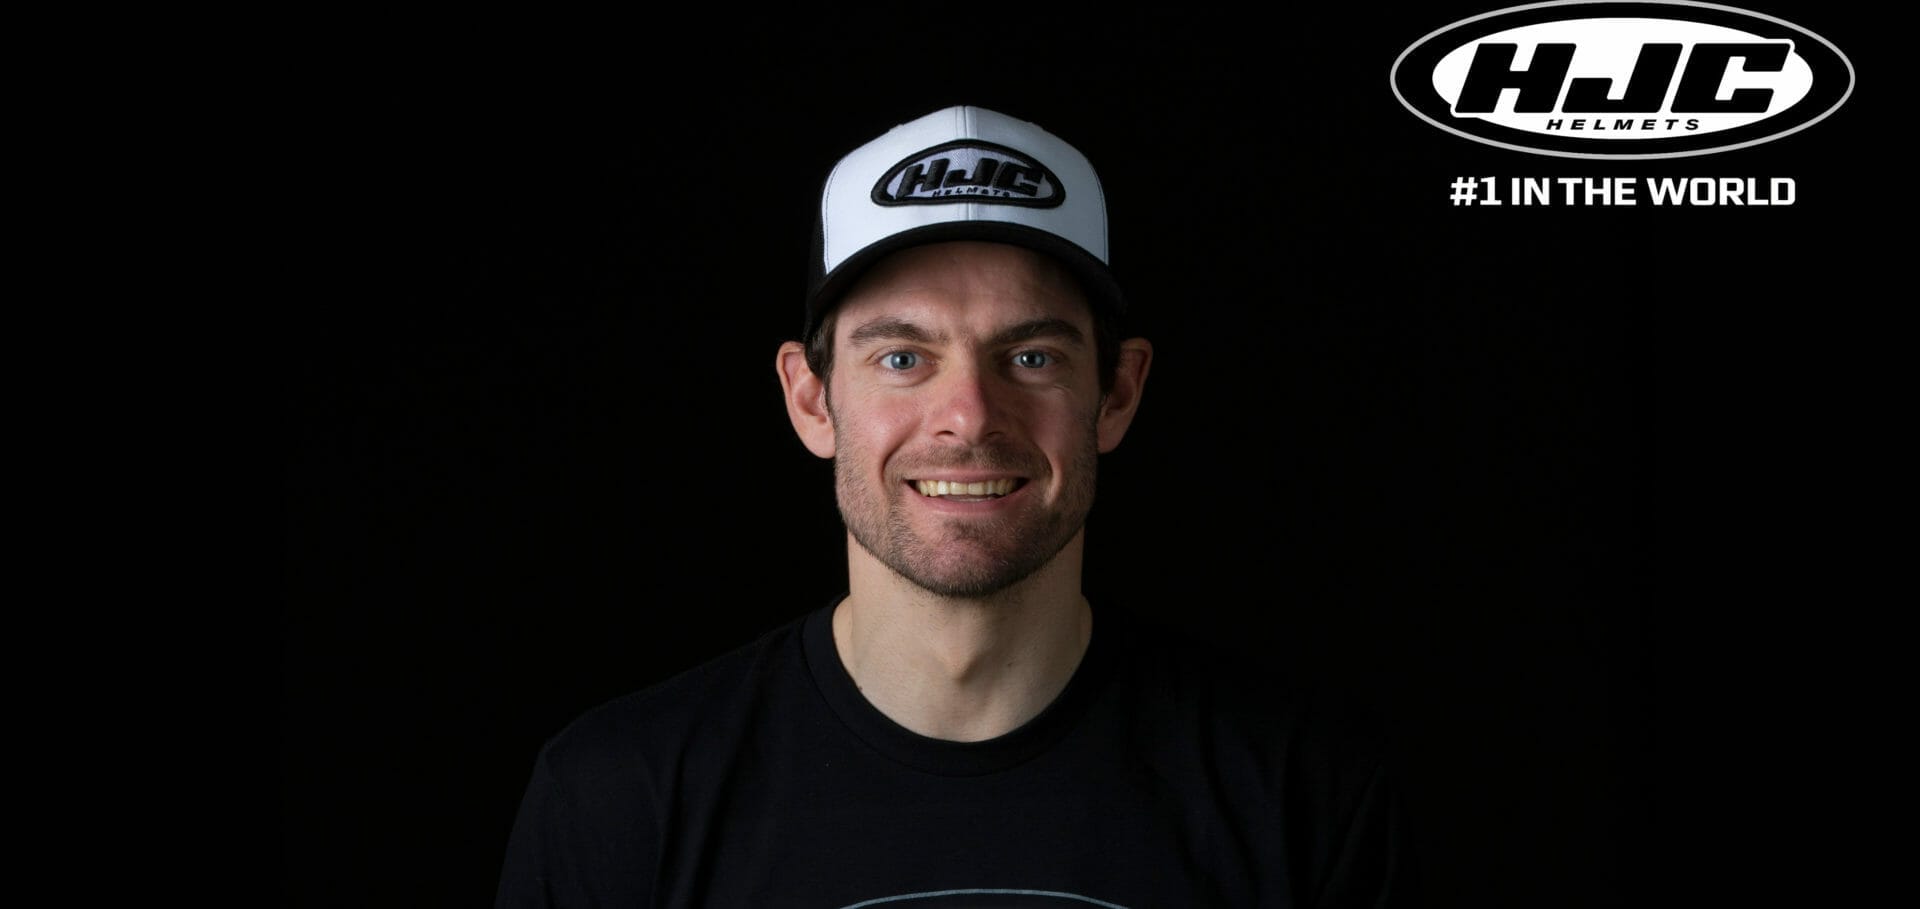 Cal Crutchlow comes with a new helmet sponsor